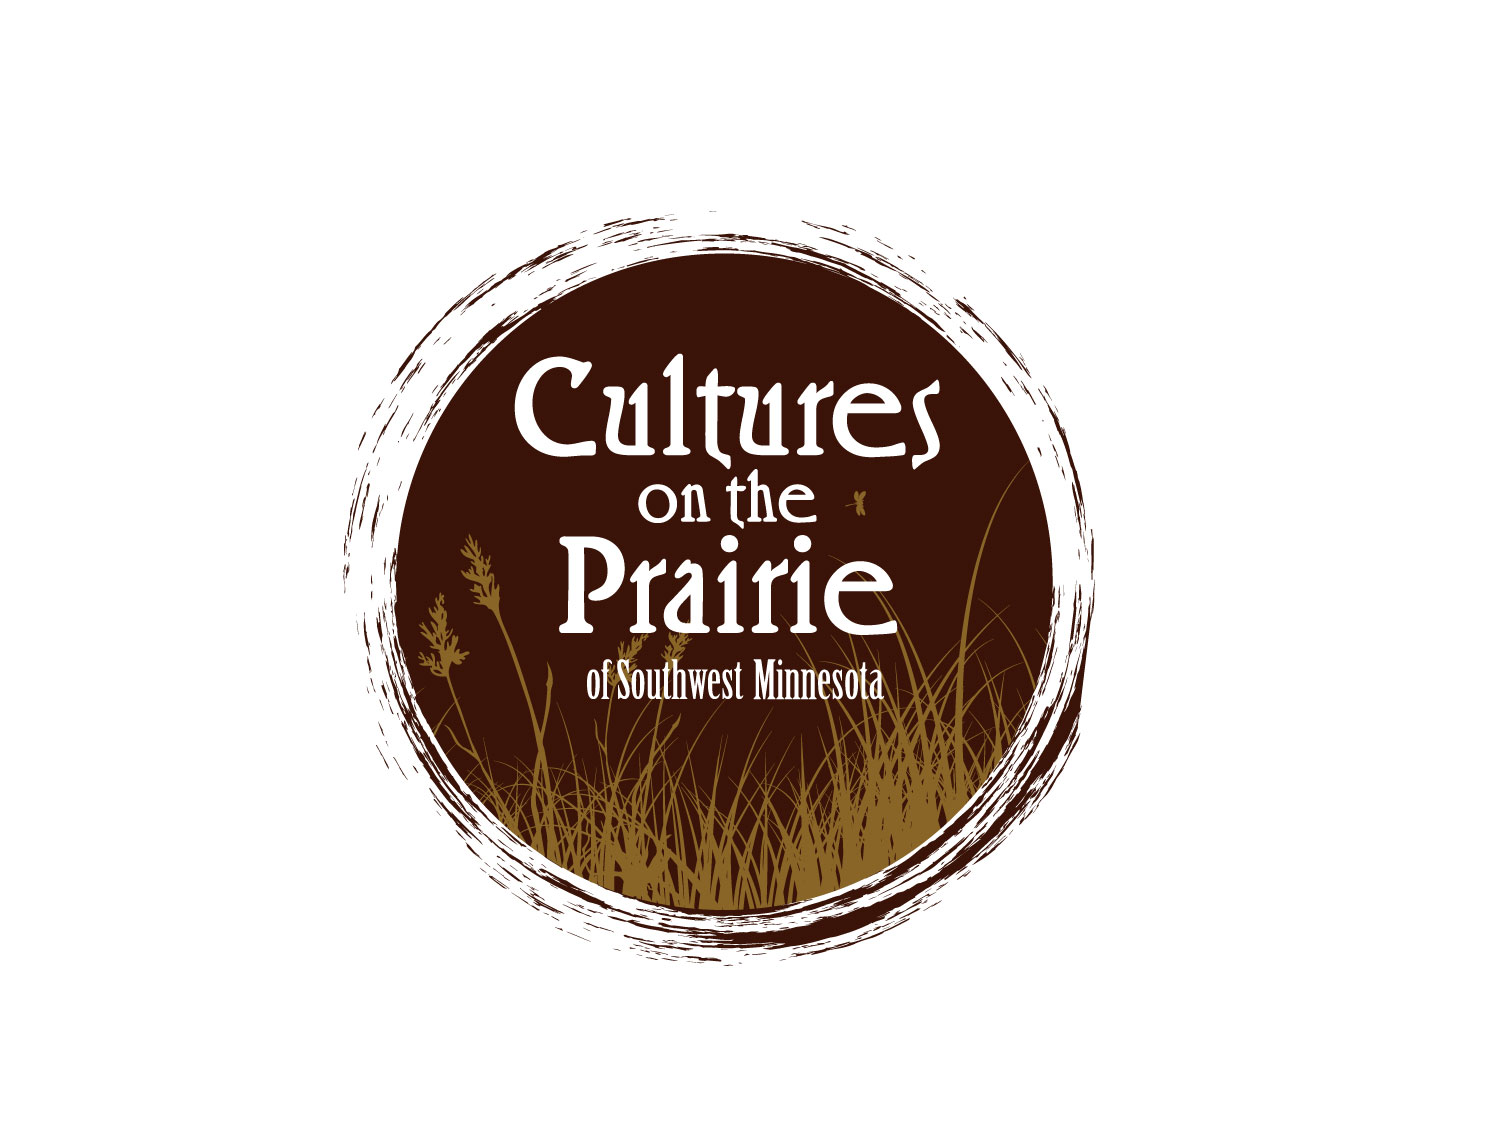 SMSU to Host Cultures on the Prairie, Feb. 13-14